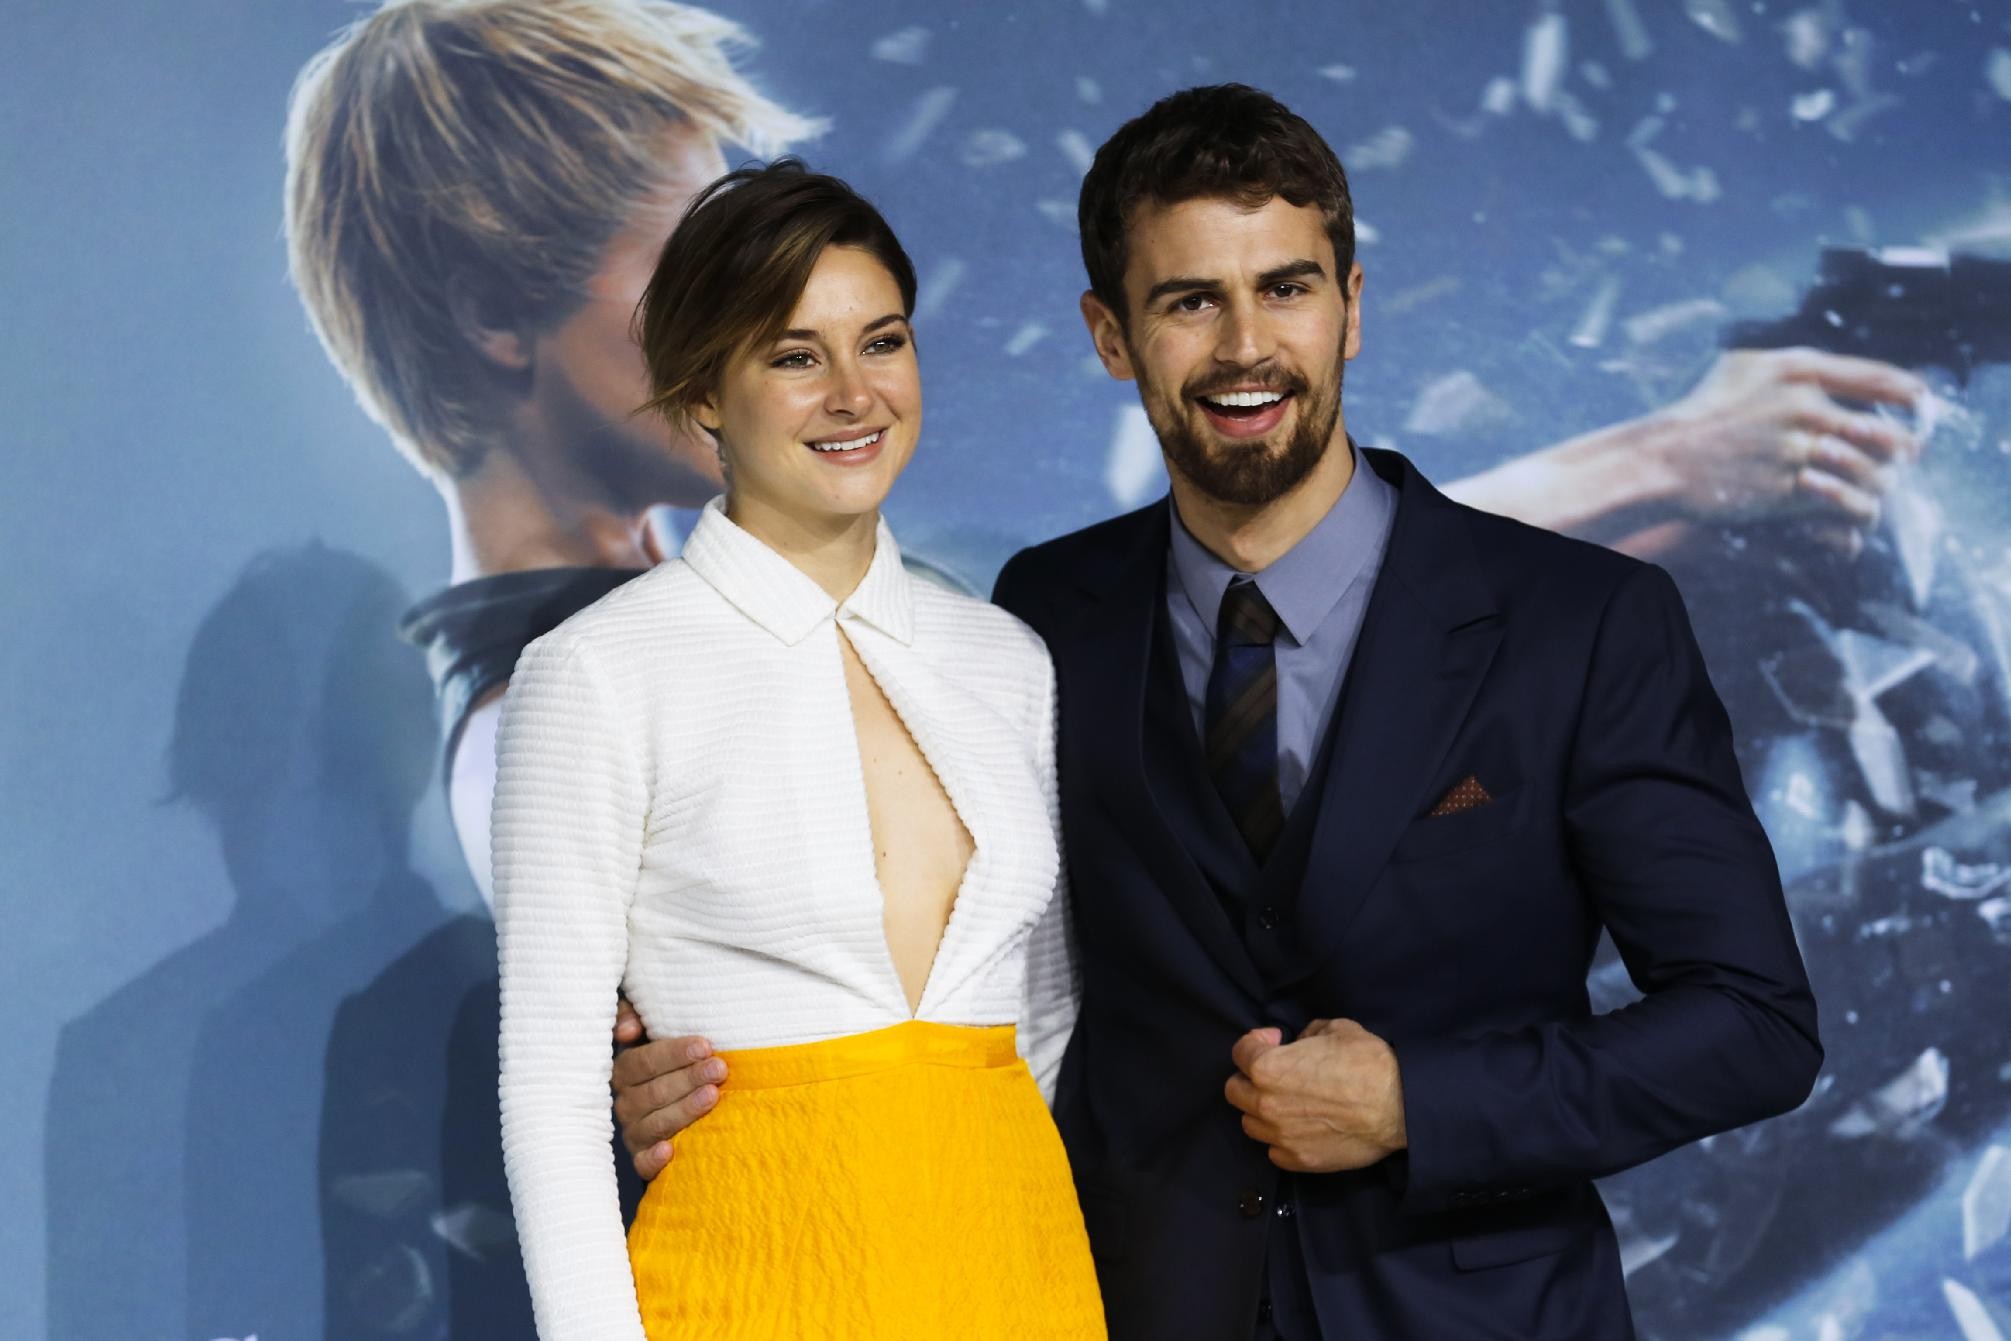 Shailene Woodley braless showing cleavage at the Insurgent premiere in Berlin #75170126